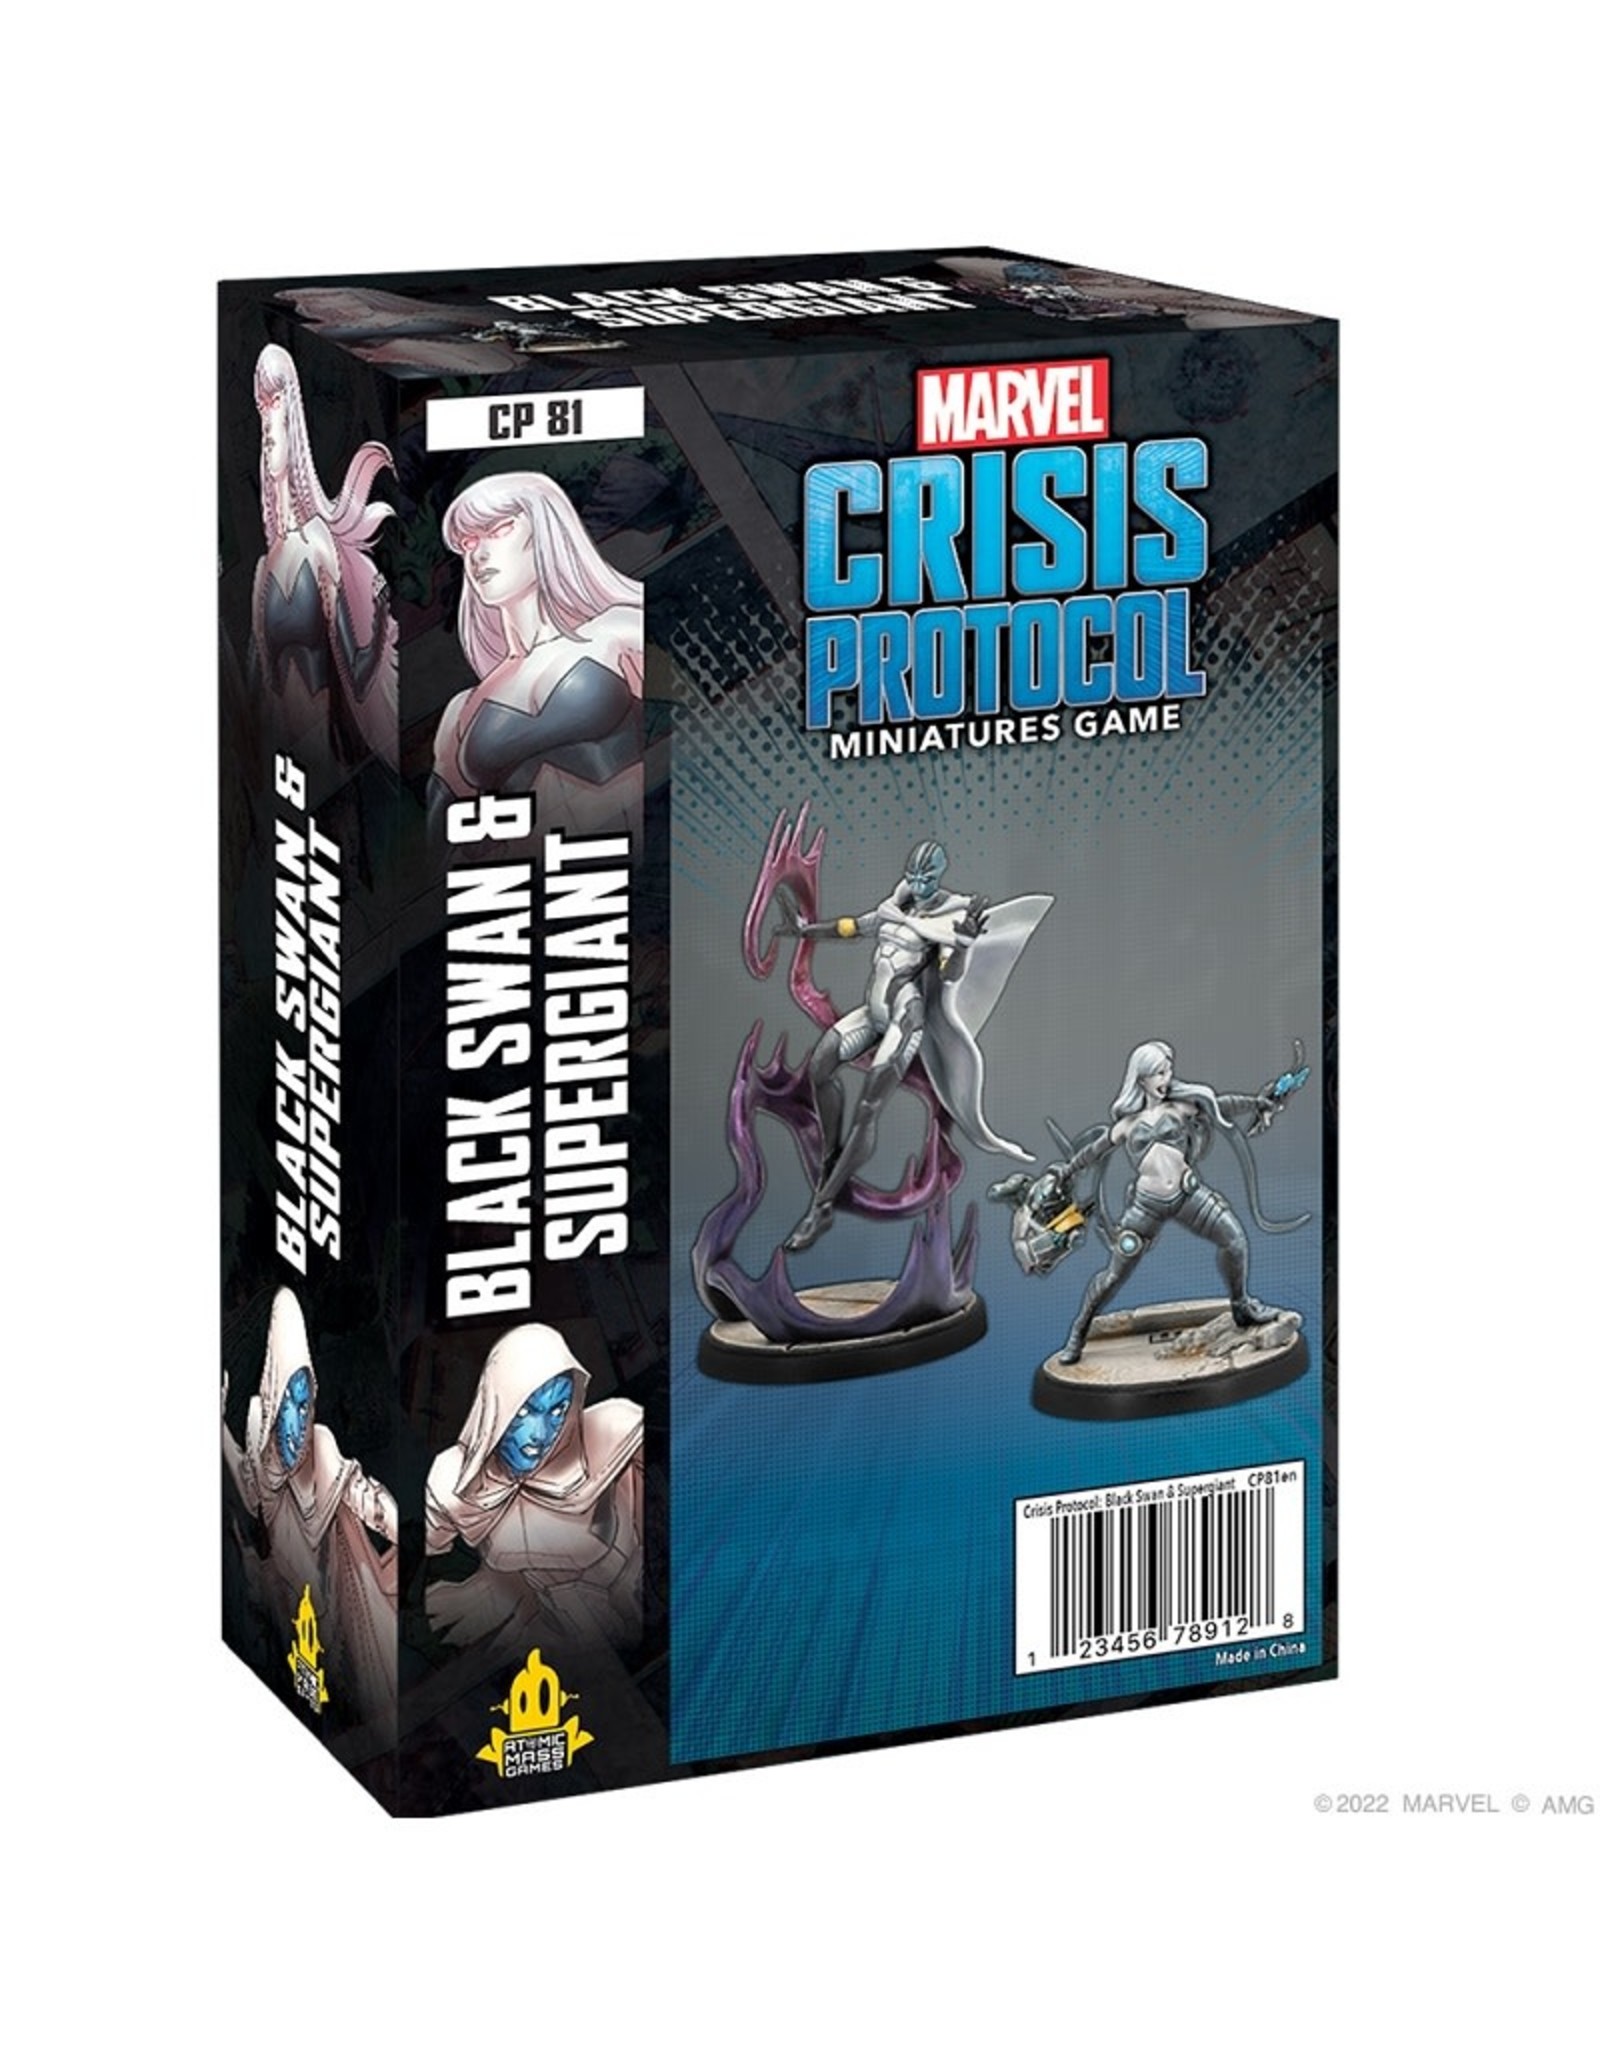 Atomic Mass Games Marvel Crisis Protocol: Black Swan and Supergiant